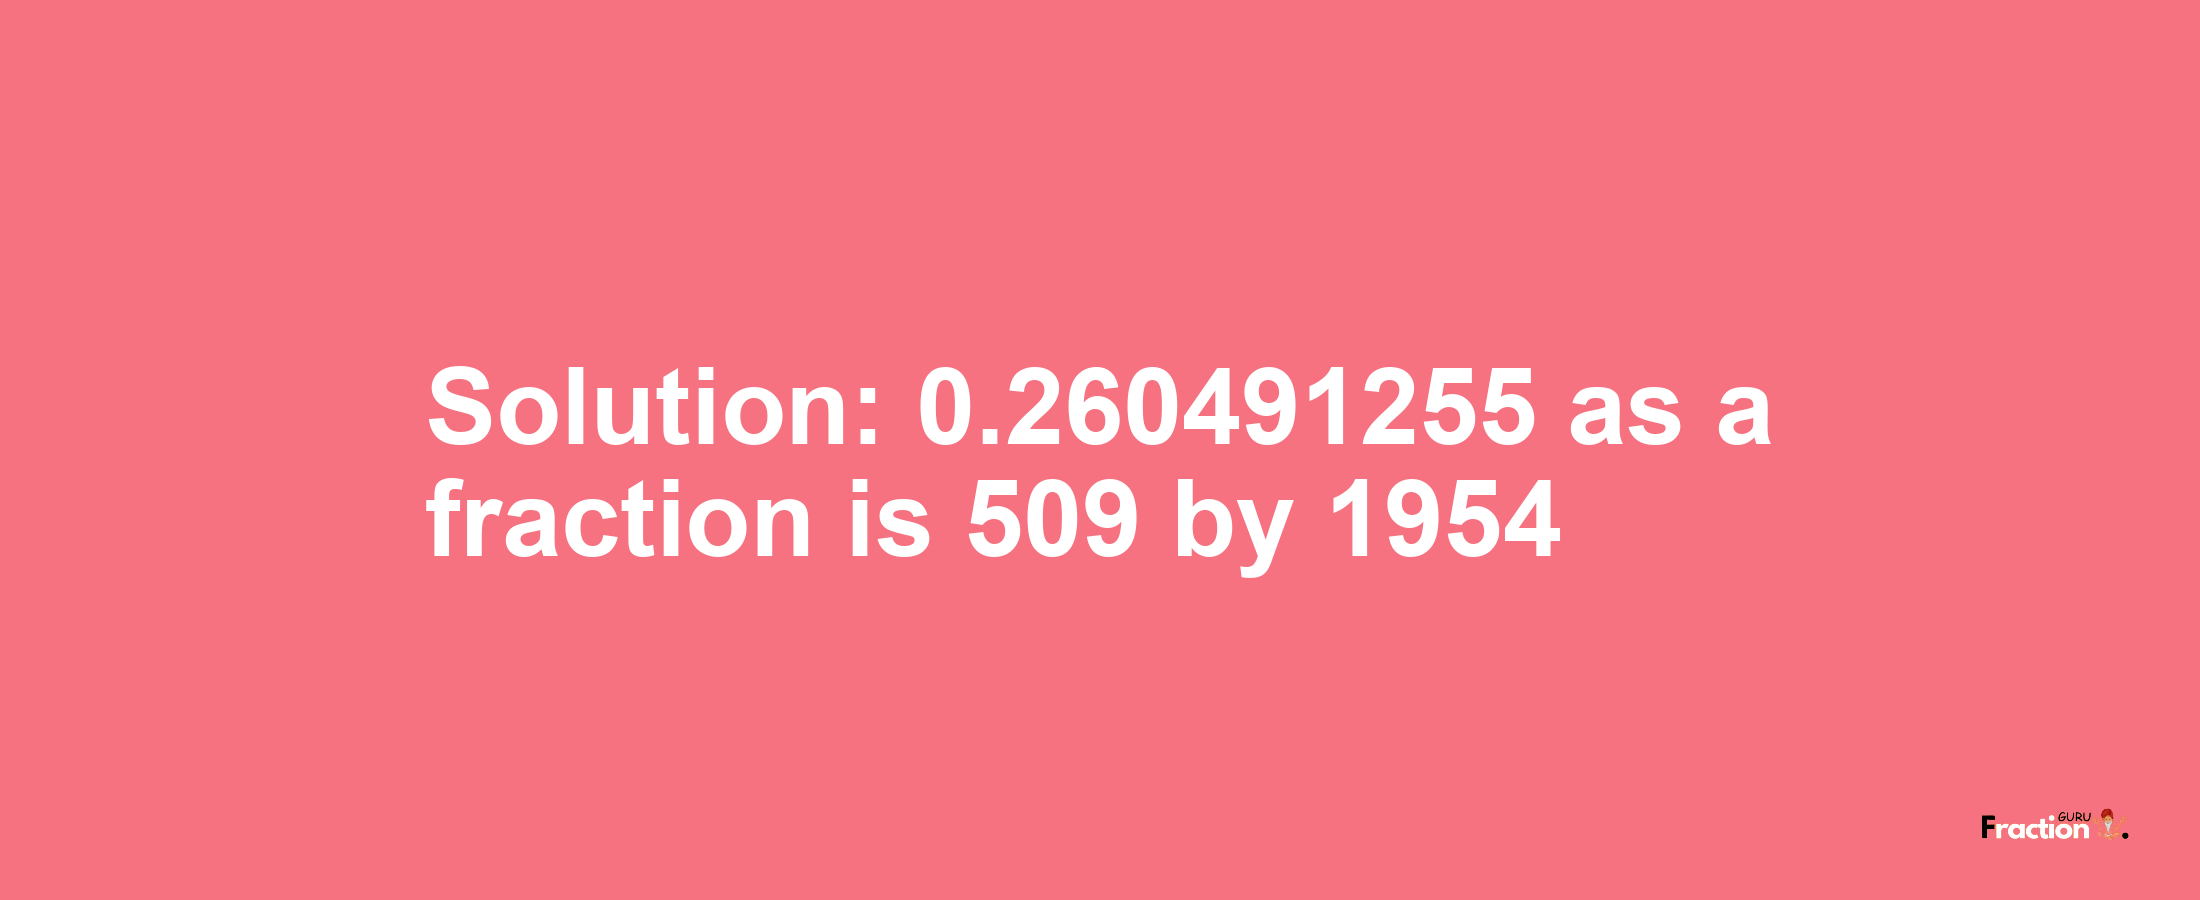 Solution:0.260491255 as a fraction is 509/1954